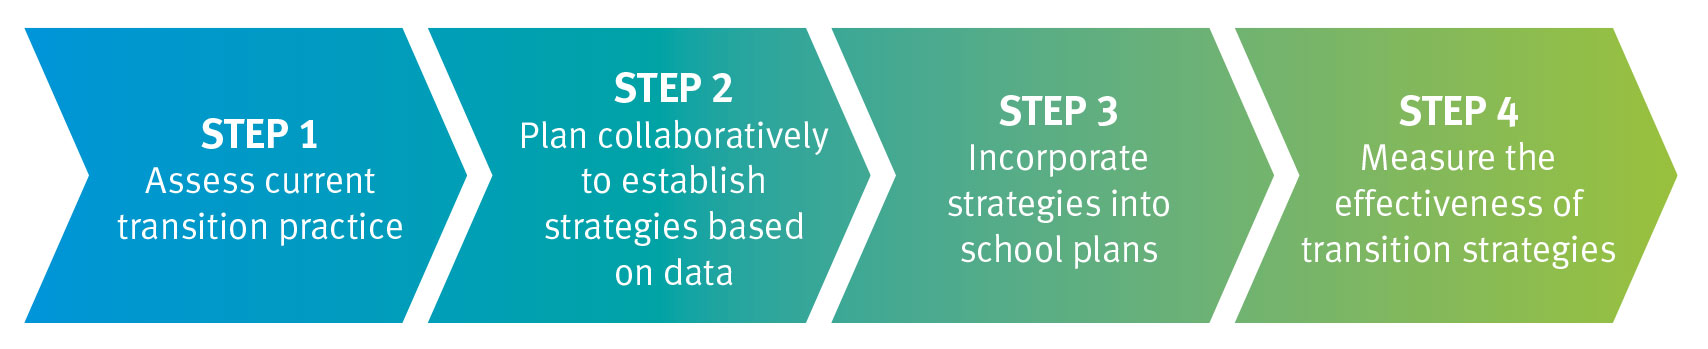 Text says, 'Step 1: assess current transition practice, Step 2: plan collaboratively to establish strategies based on data, Step 3: incorporate strategies into school plans, Step 4: meaure the effectiveness of transition strategies.'